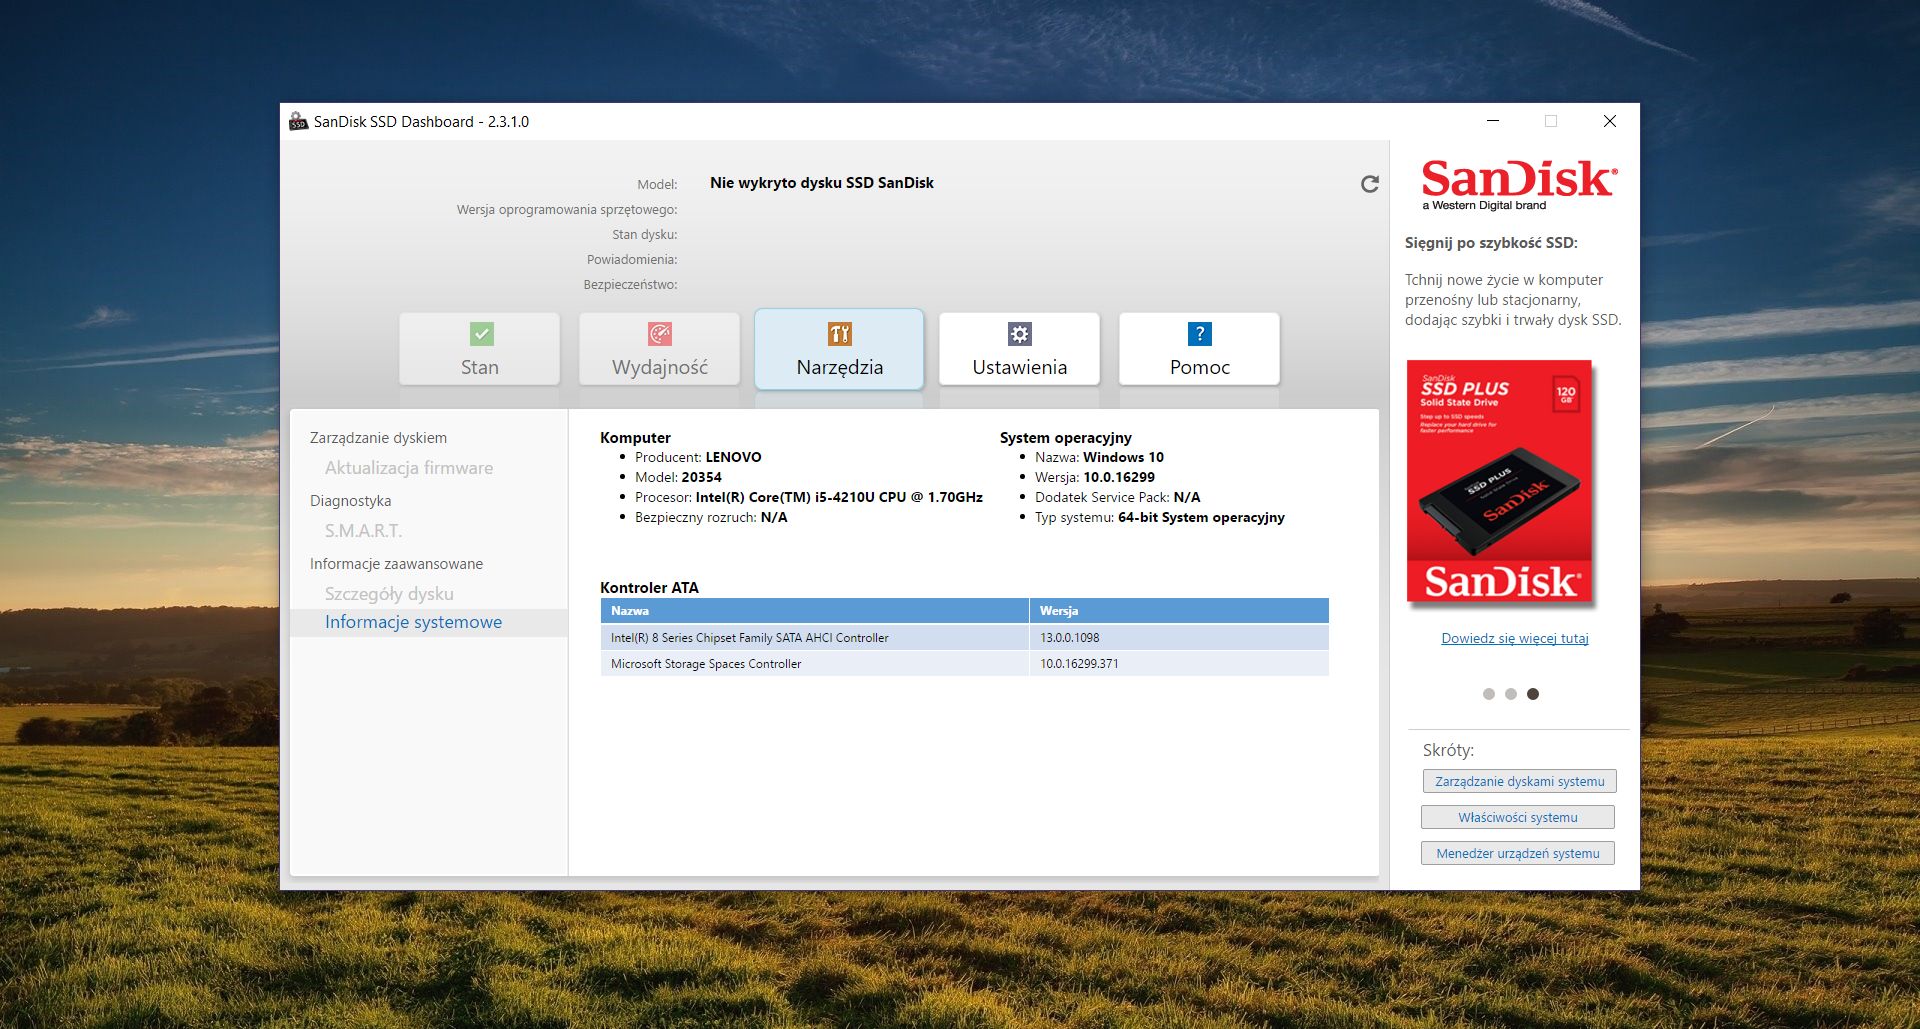 WD SSD Dashboard 5.3.2.4 for mac download free